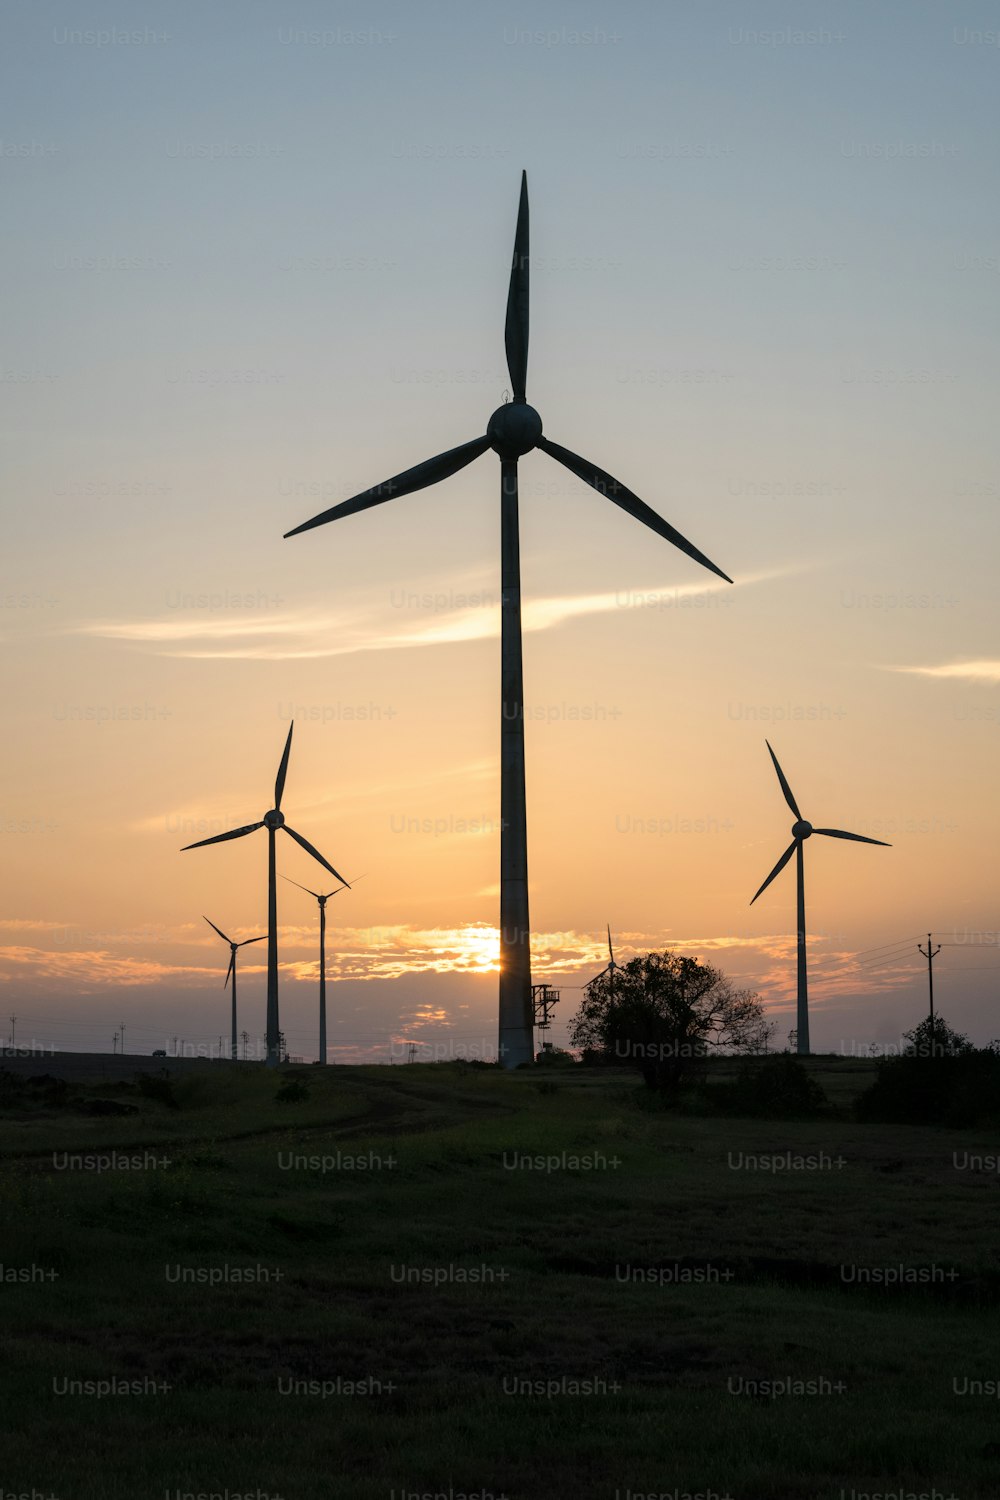 a group of windmills in a field at sunset